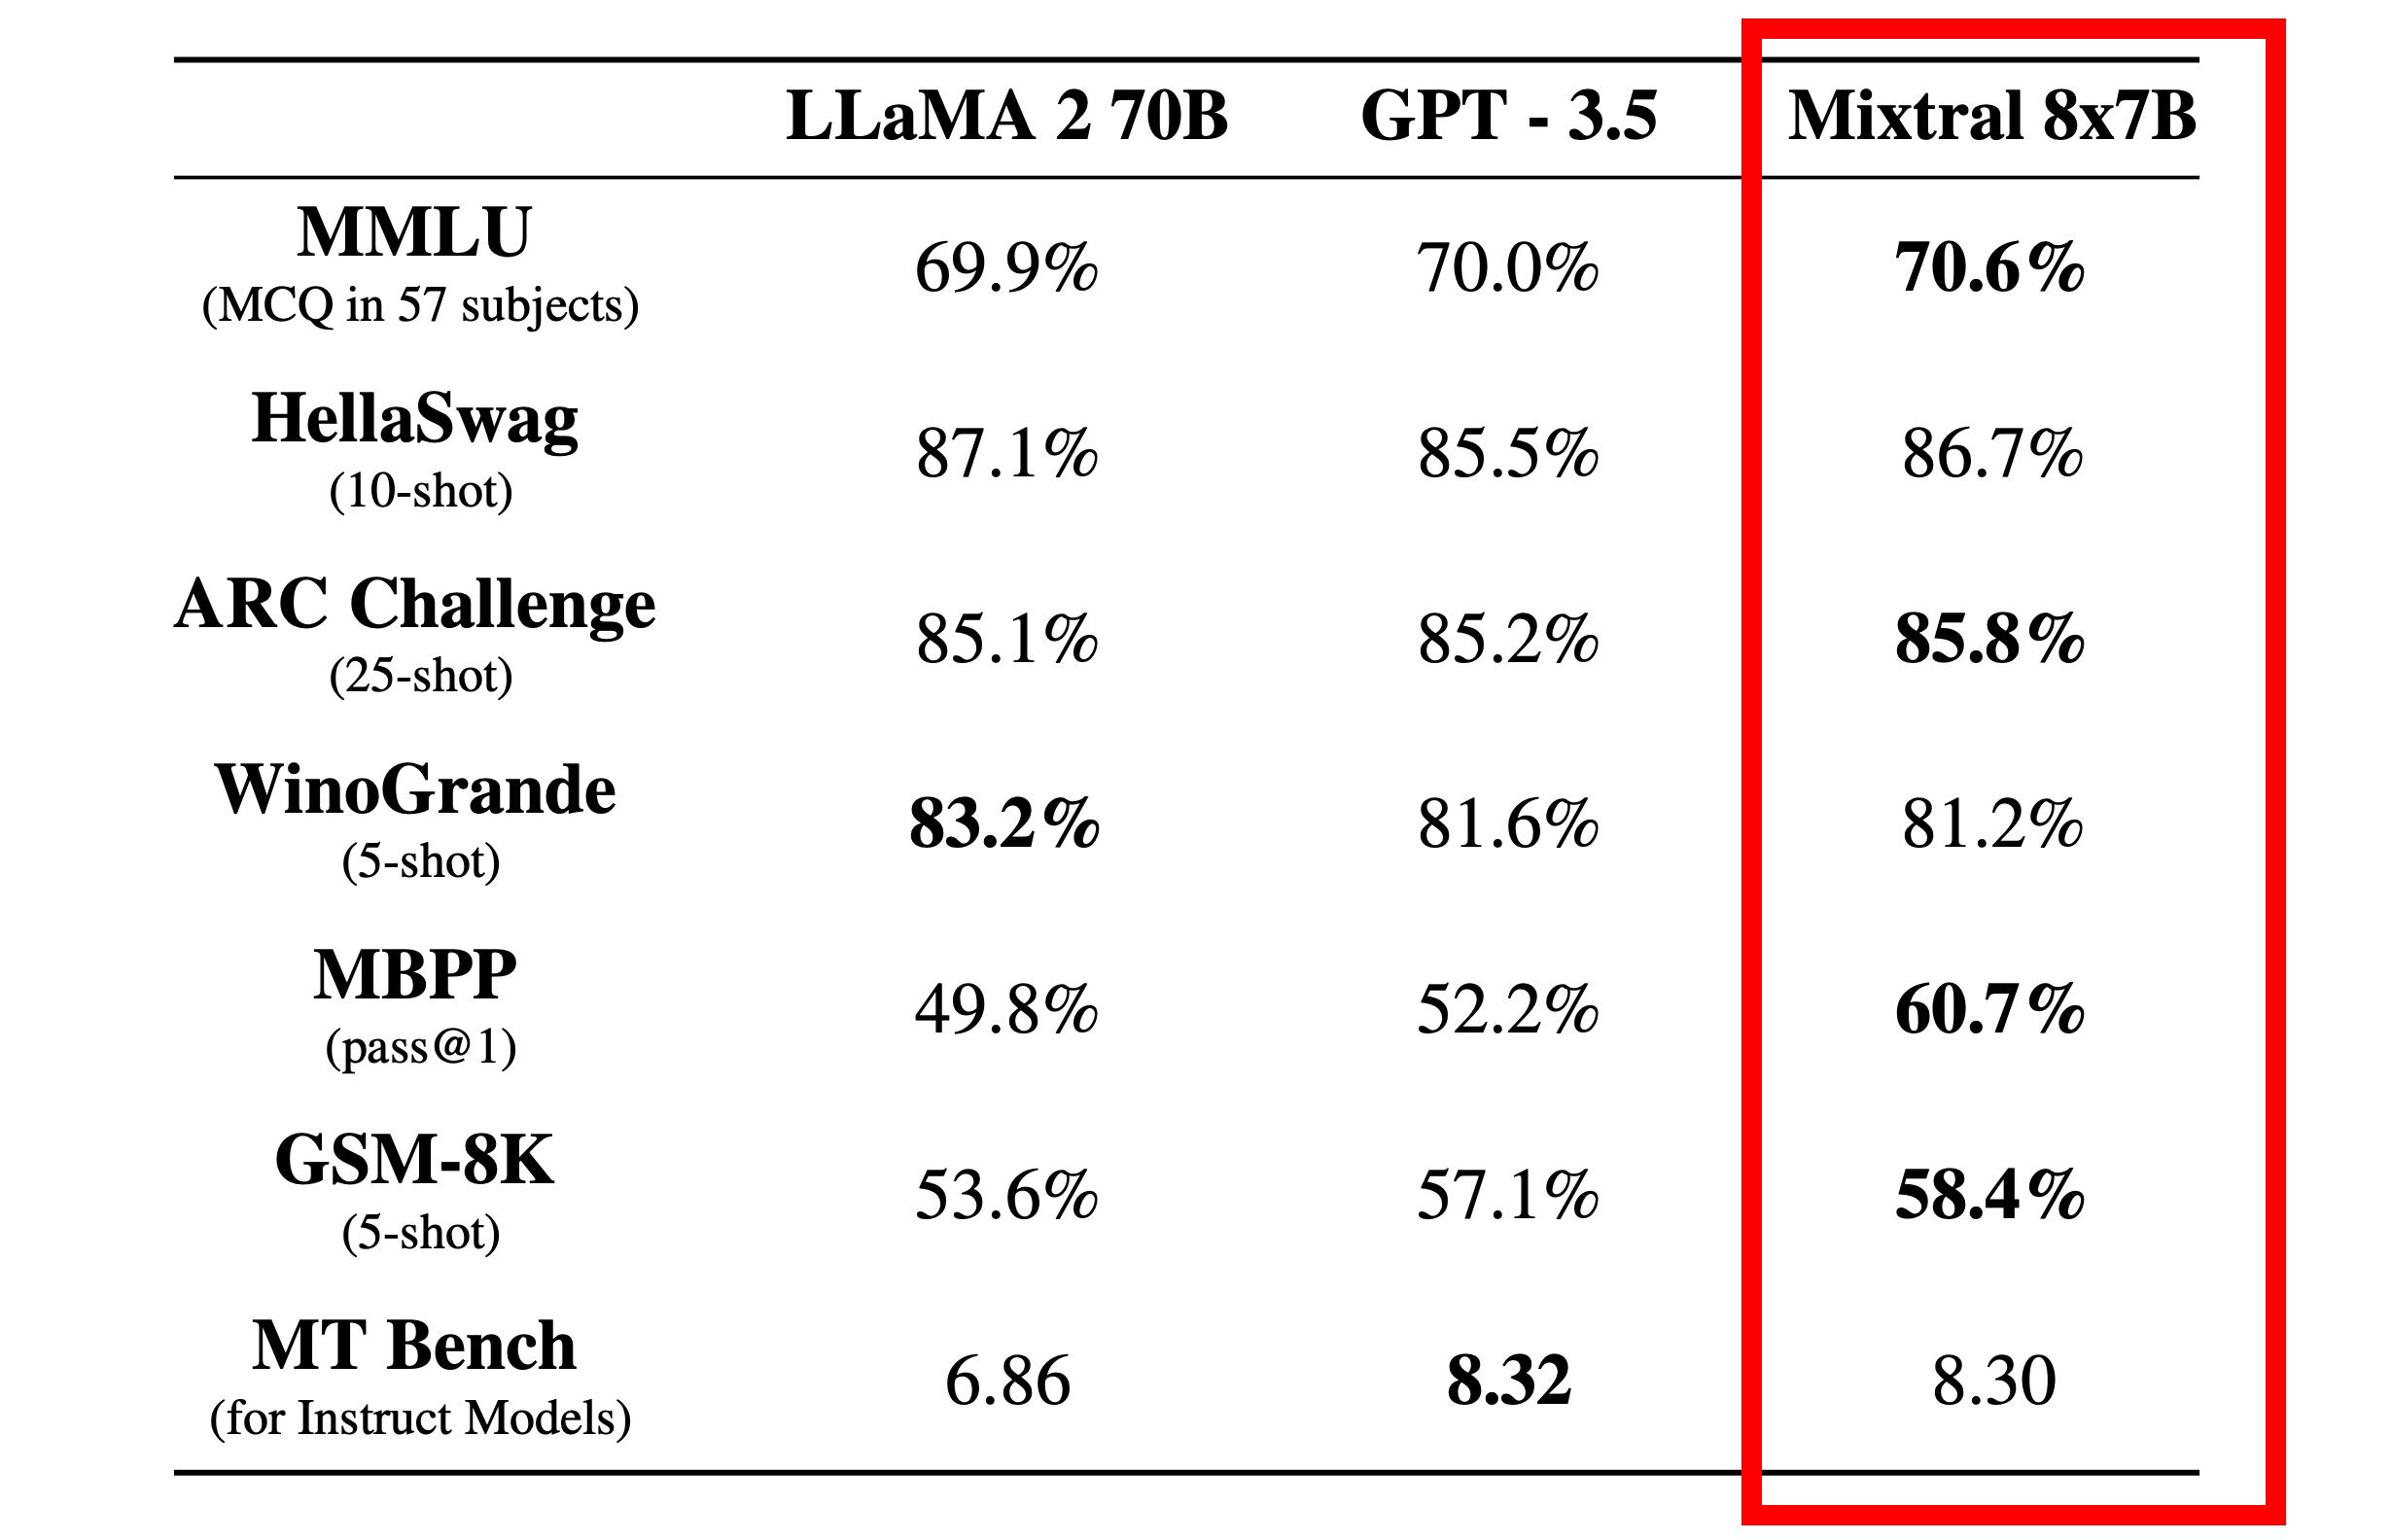 A comparison table showing performance percentages for various AI models including LLAMA 2 70B, GPT-3.5, and Mixtral 8x7B across different benchmarks like MMLU, HellaSwag, ARC Challenge, and others.